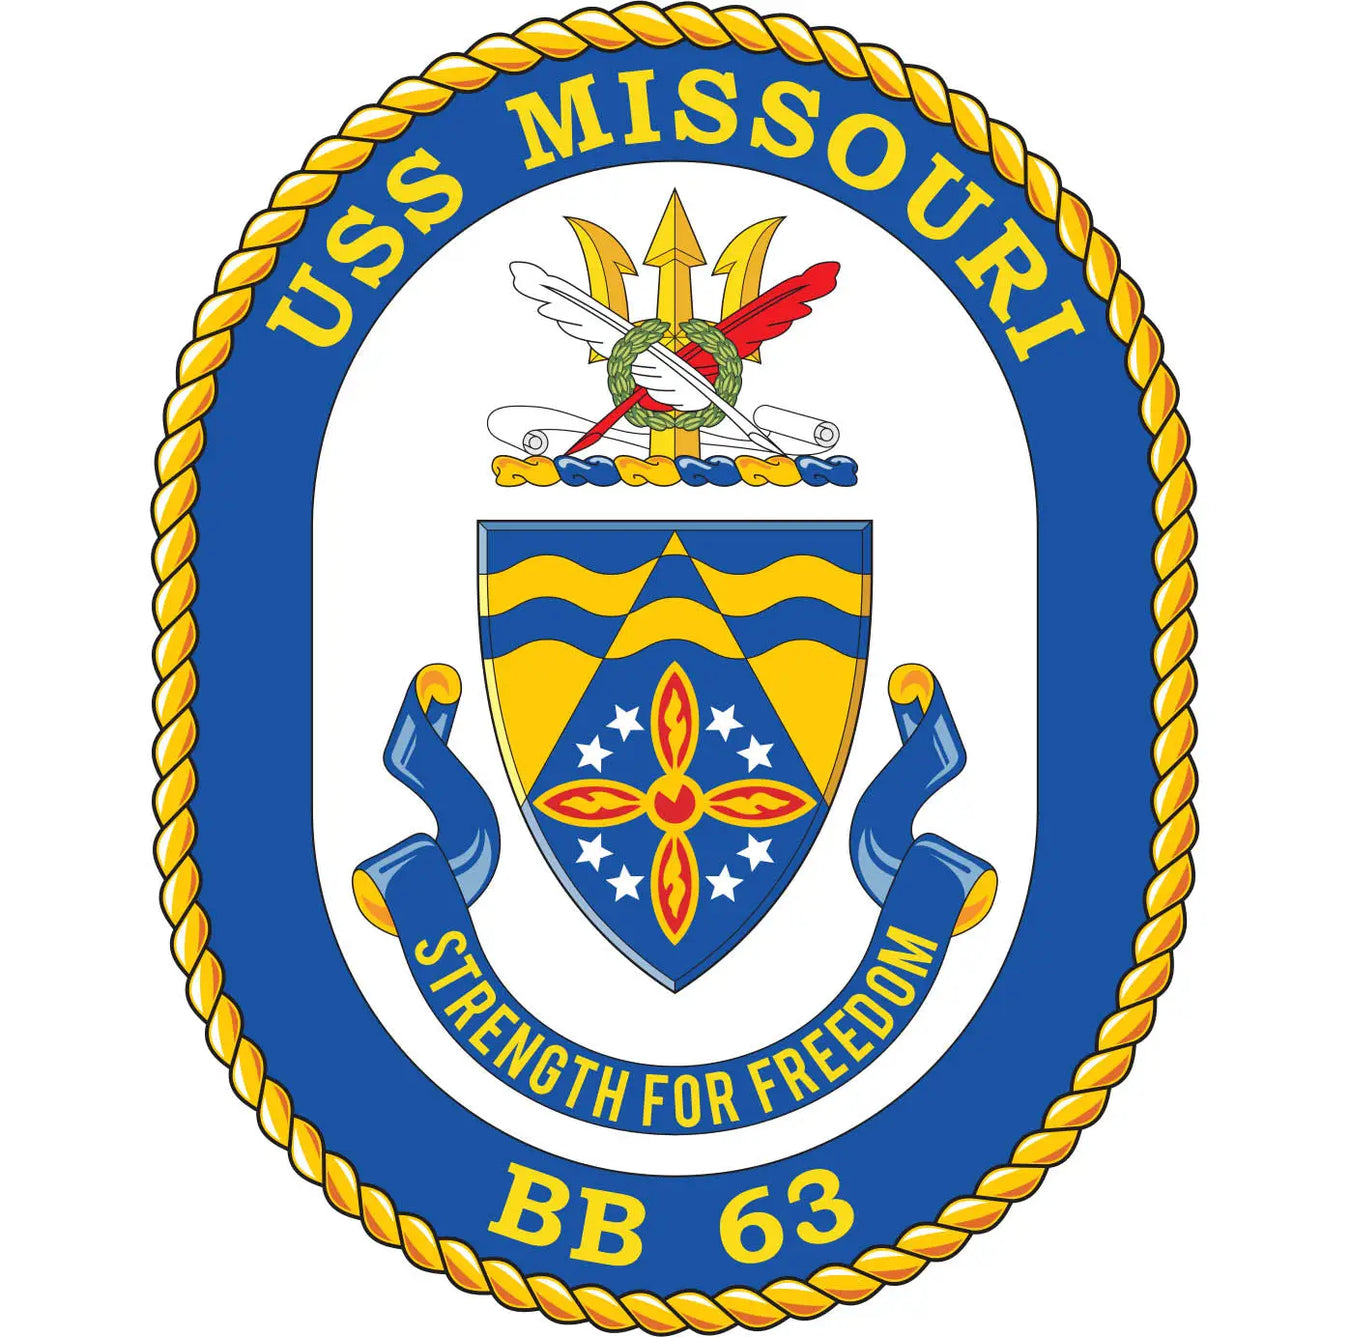 USS Missouri (BB-63) Merchandise - Shop T-Shirts, hoodies, patches, pins, flags, decals, hats and more.